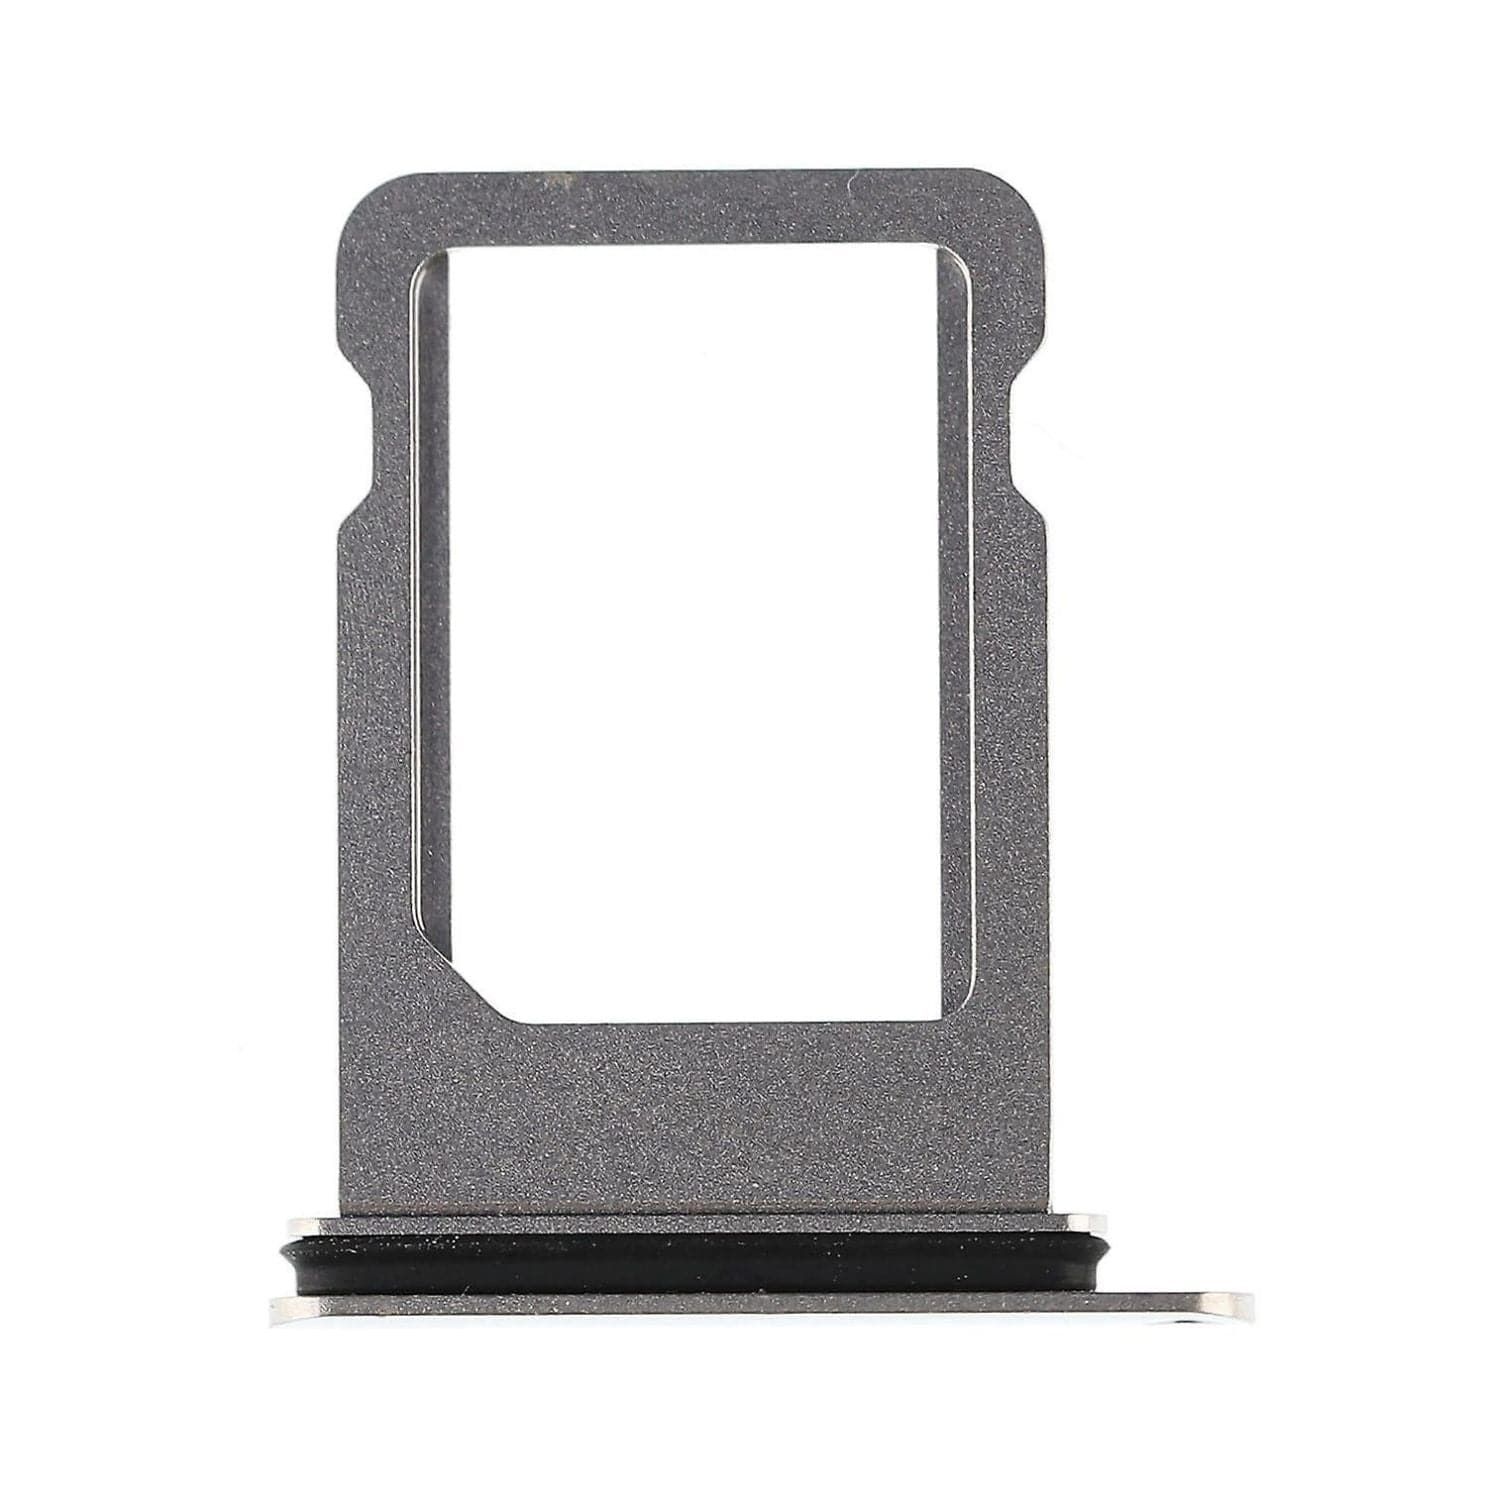 Sim Tray for iPhone X Silver